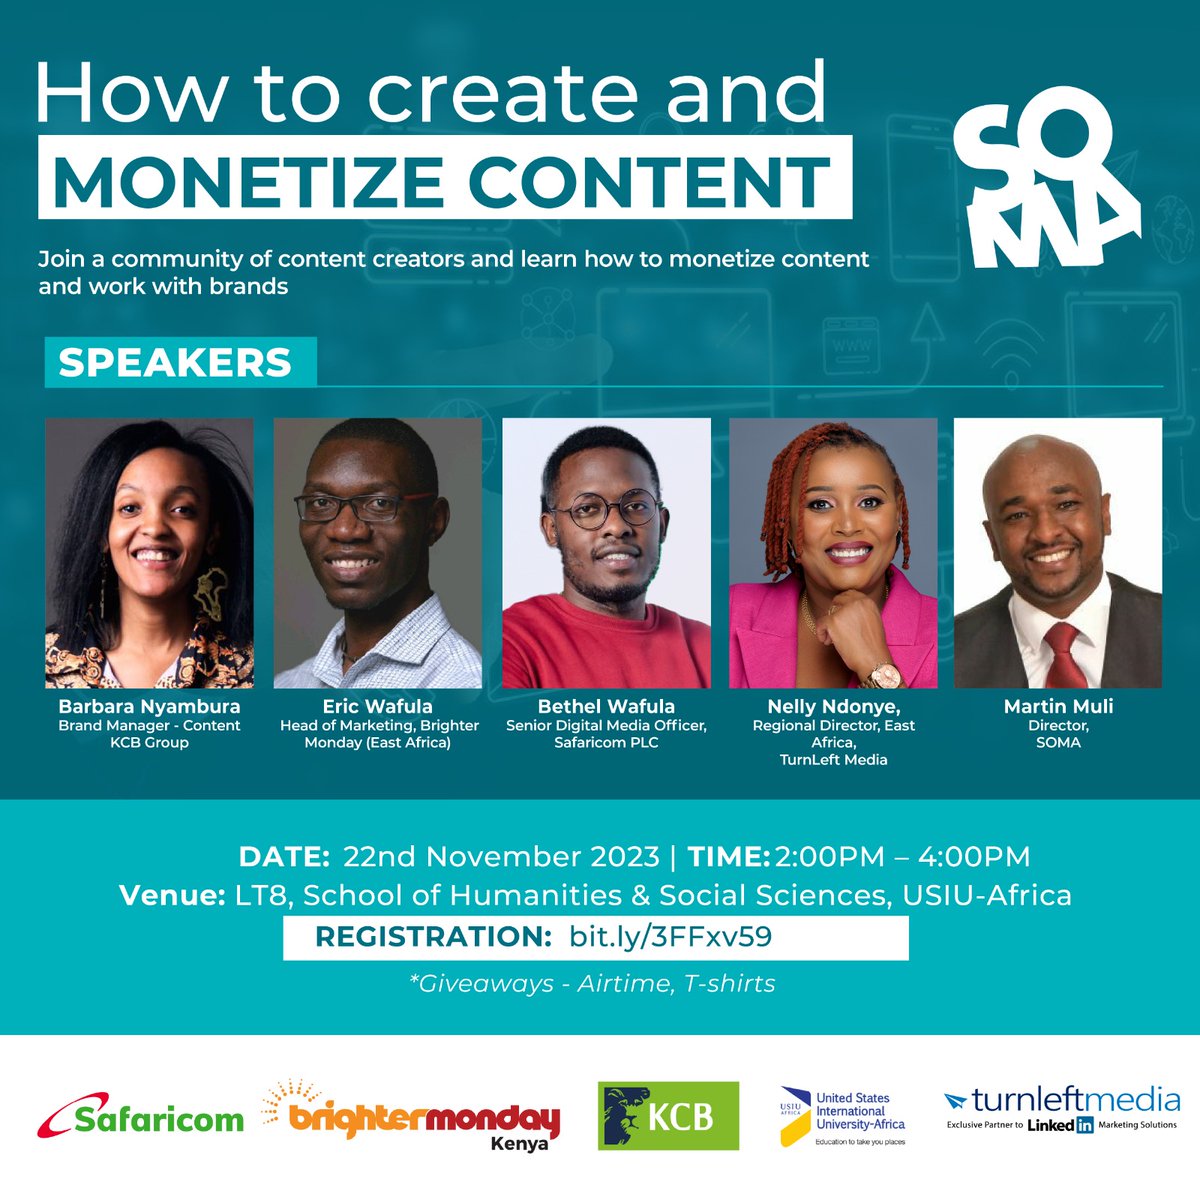 Join us for a conversation on content creation and monetization models at @ExperienceUSIU on 22nd November from 2:00PM. #ContentMonetization #USIUConnect @SafaricomPLC @BrighterMonKE @KCBGroup